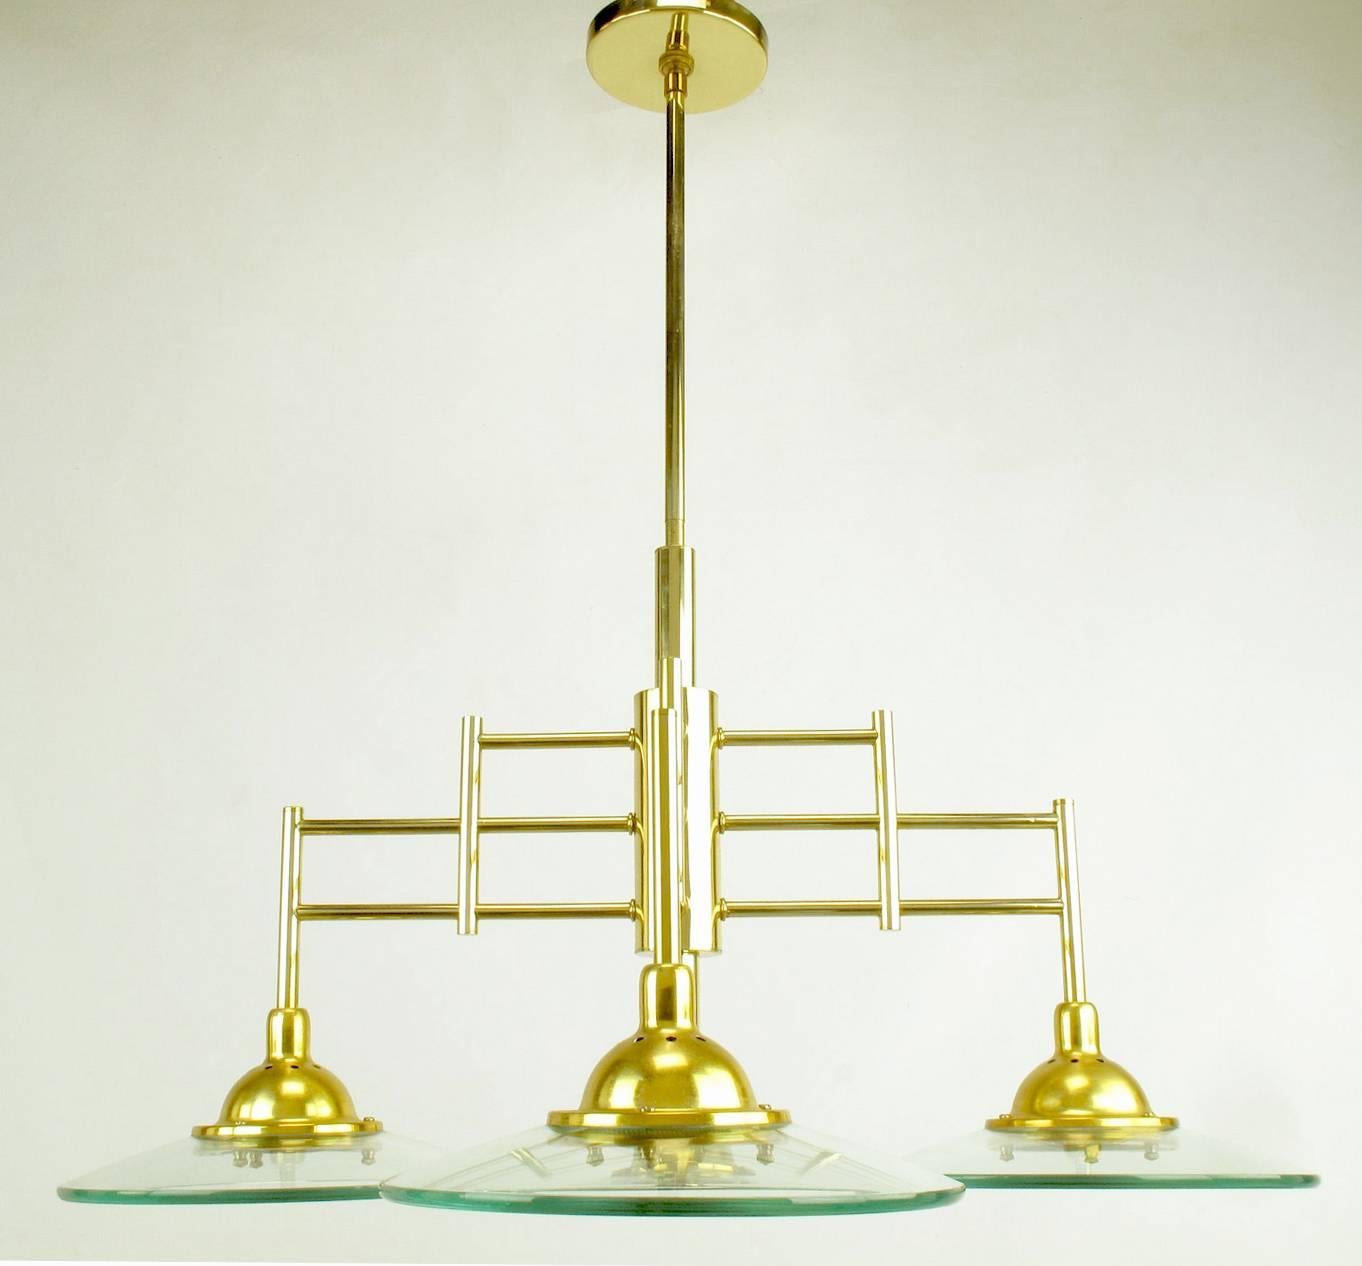 North American Architectural Four-Light Brass and Glass Pendant Halogen Chandelier For Sale